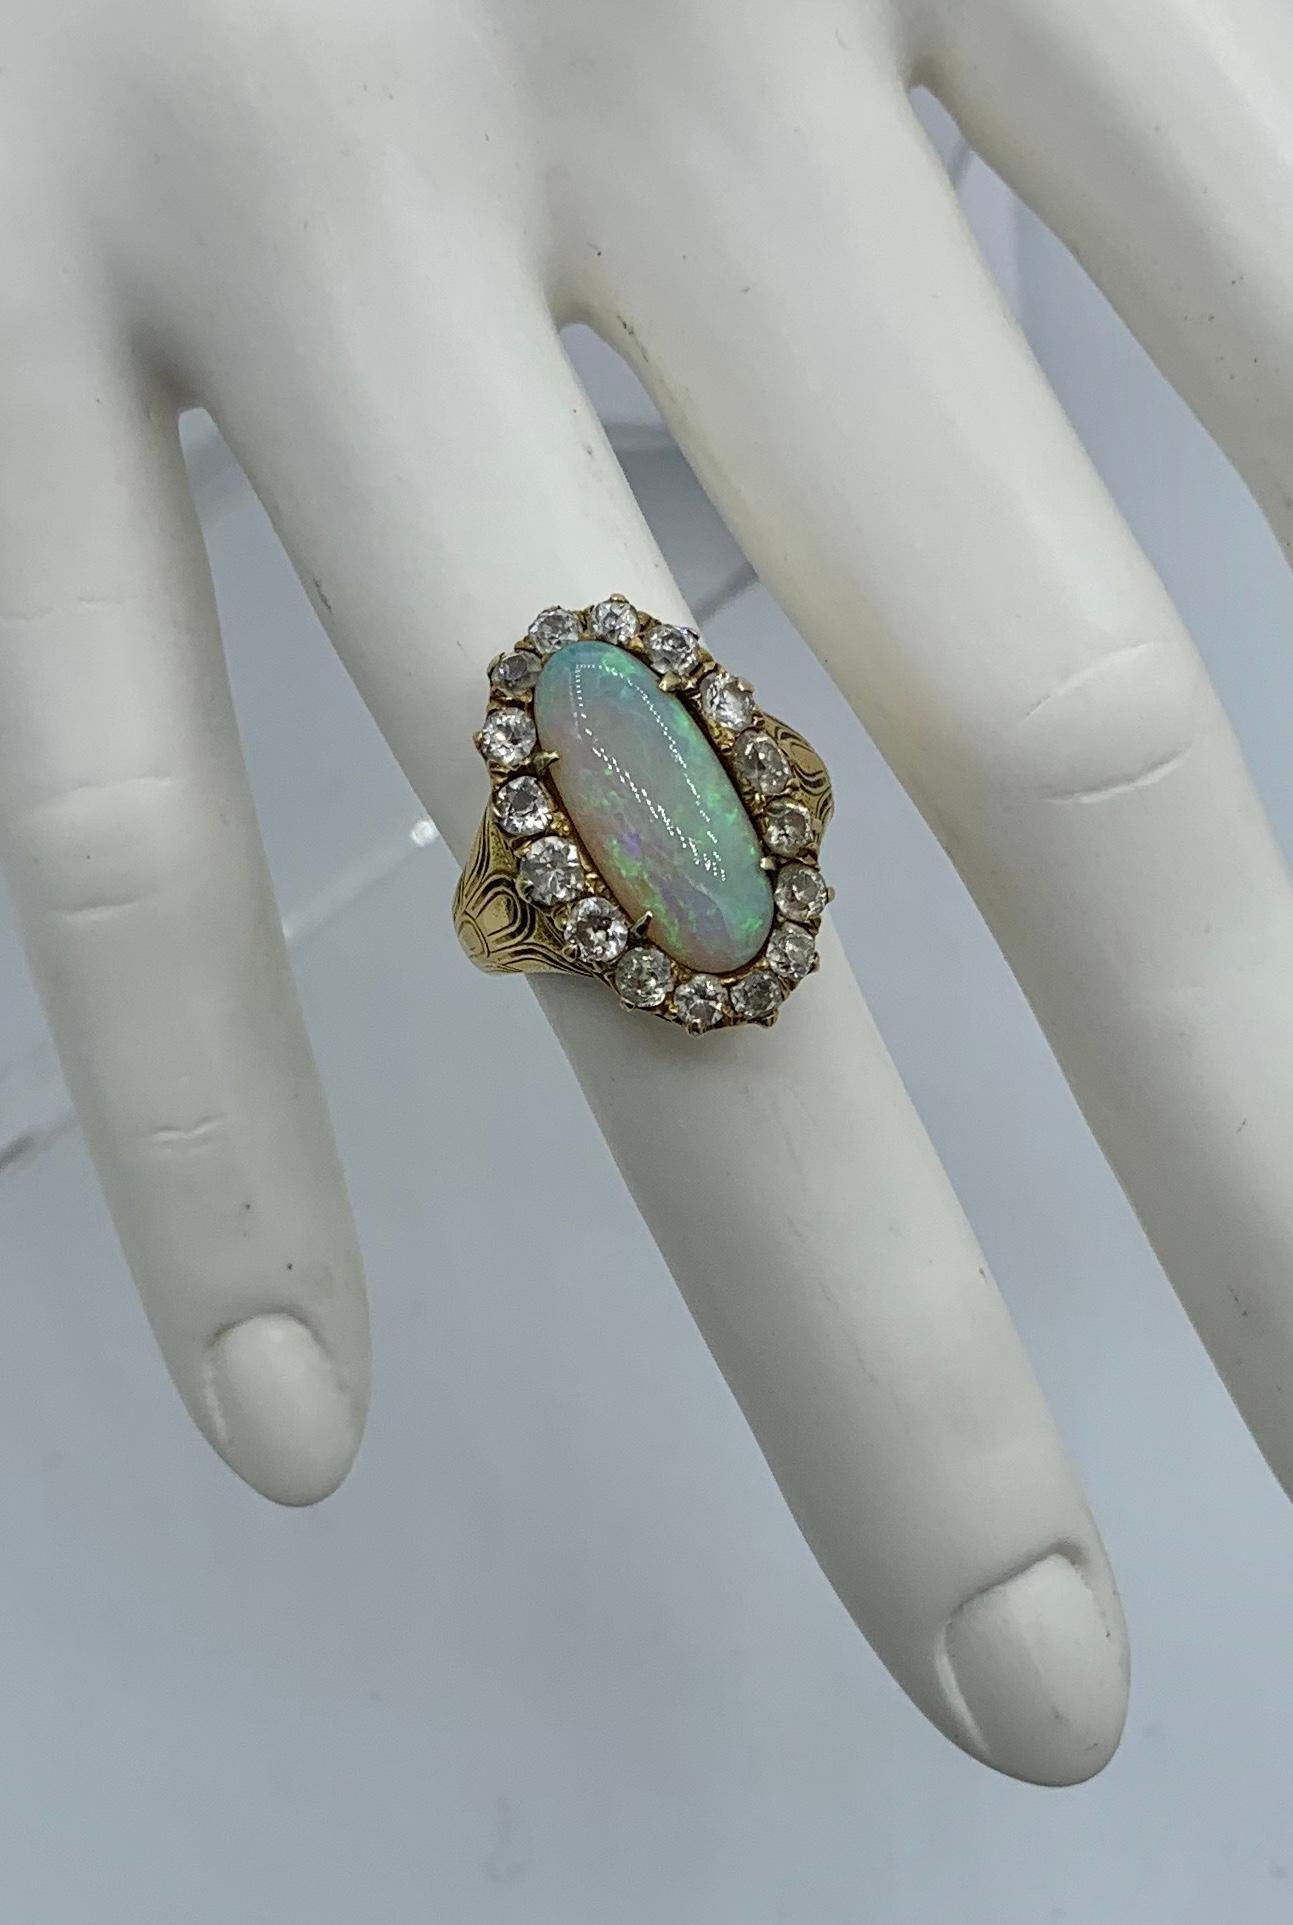 This is one of the most beautiful Antique Belle Epoque - Art Deco Opal Diamond Rings we have seen.  The extraordinary opal has blue, green, yellow and orange fire.  The opal is an oval cabochon of approximately two carats.  The exquisite opal is